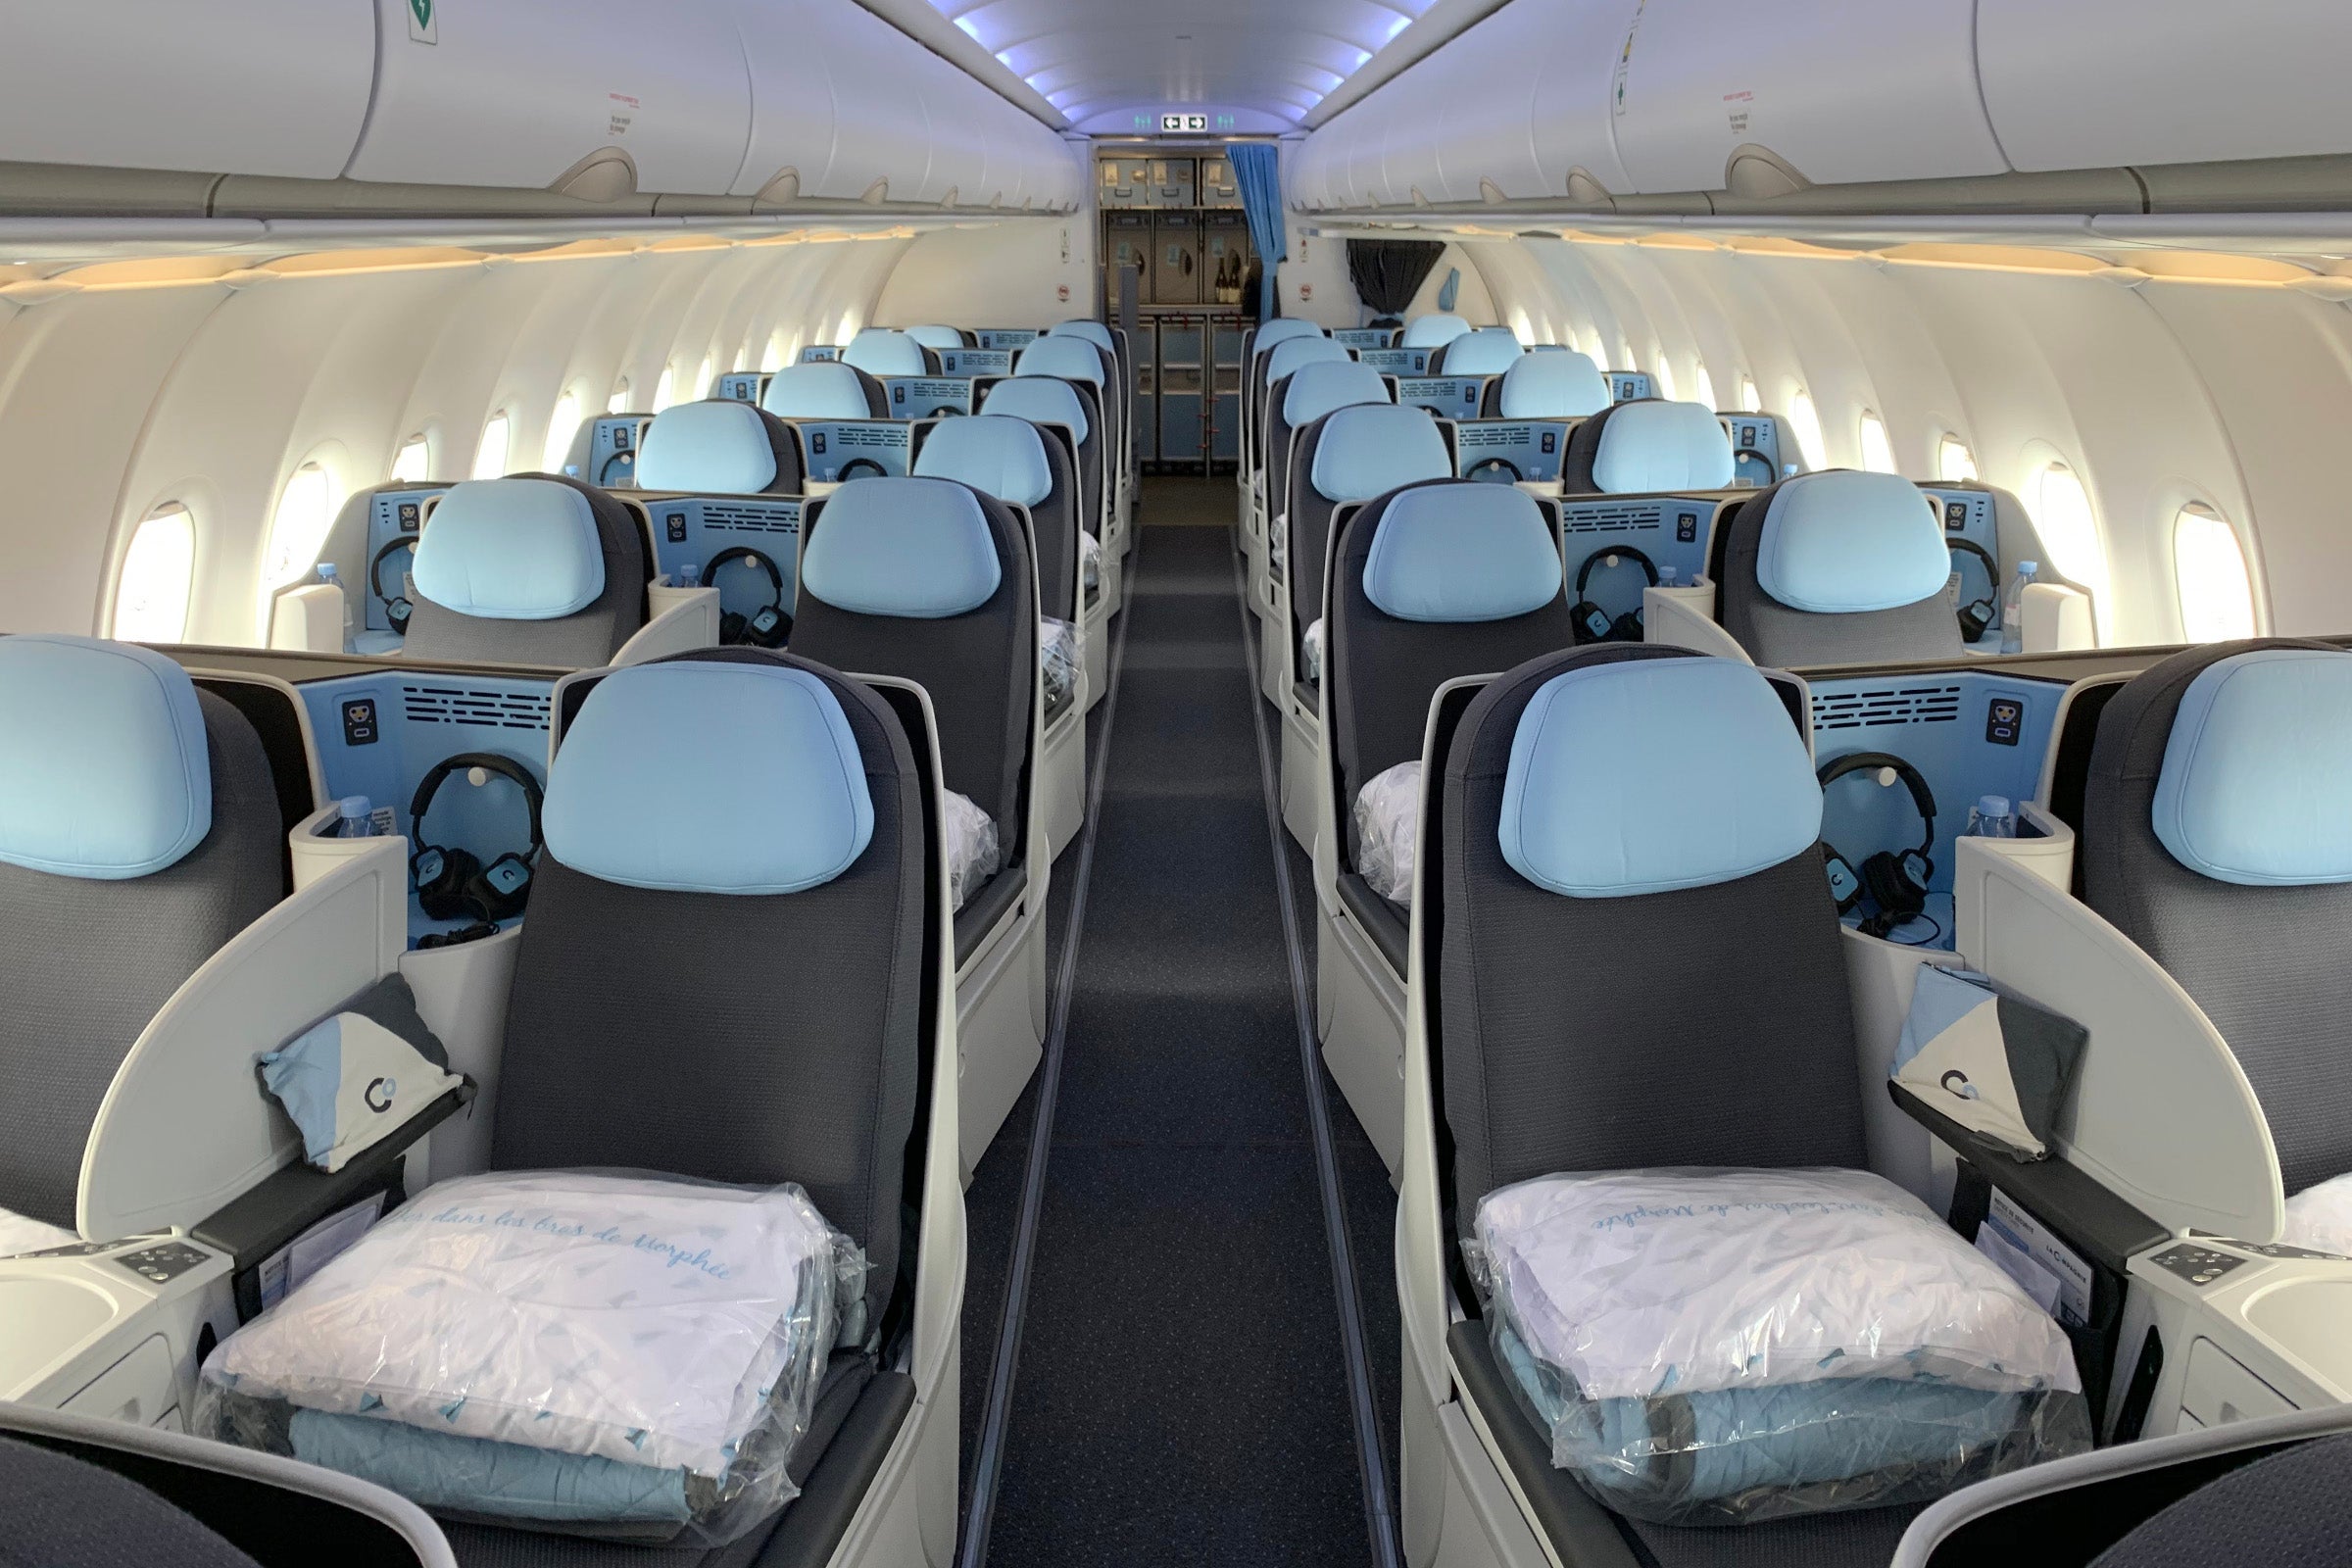 La Compagnie's aircraft are configured for only 76 passengers instead of the approximately 220 to 240 used by traditional airlines on the A321neo.